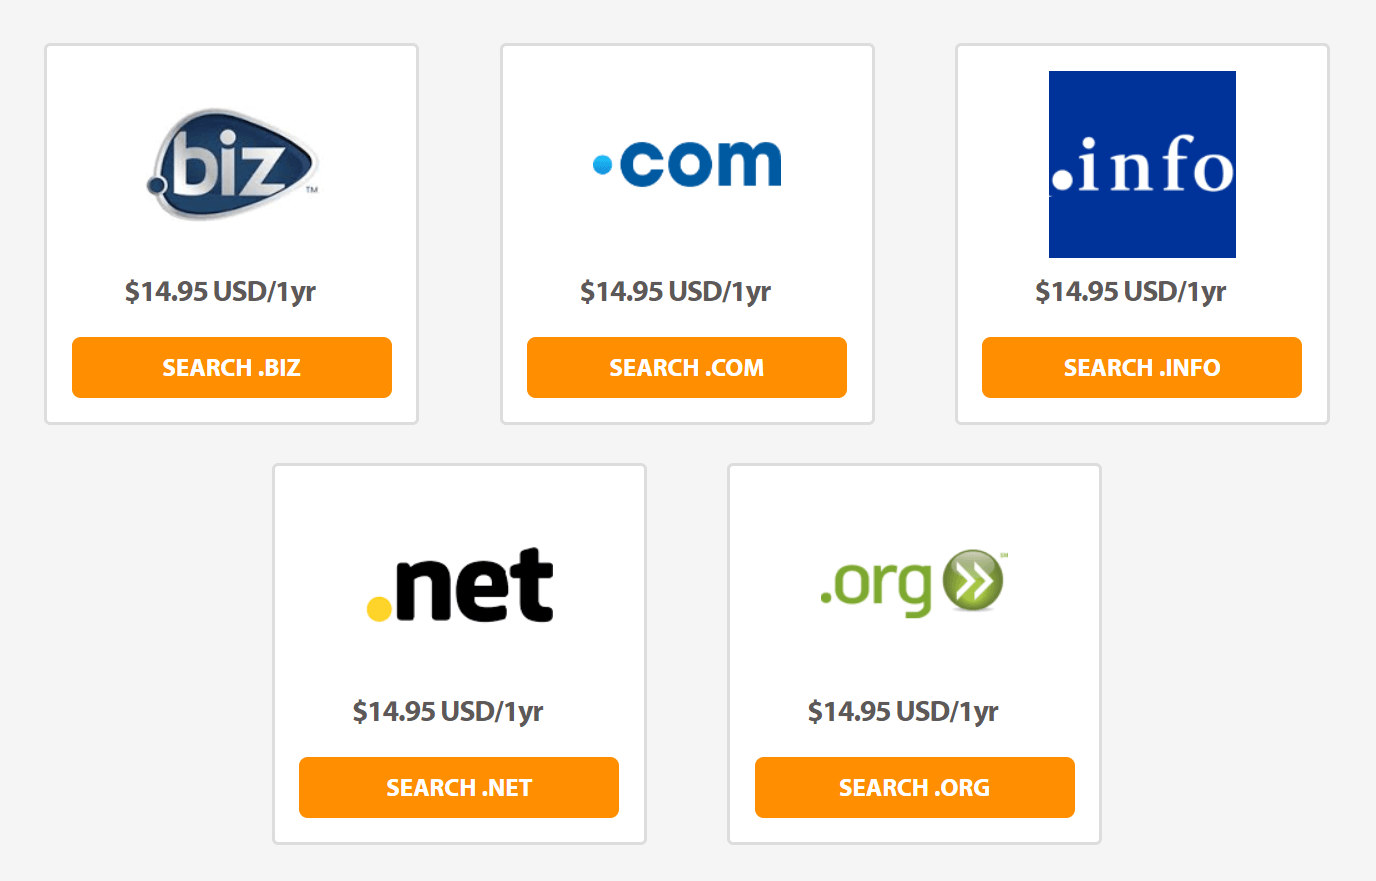 Prices for domain names at A2 Hosting.